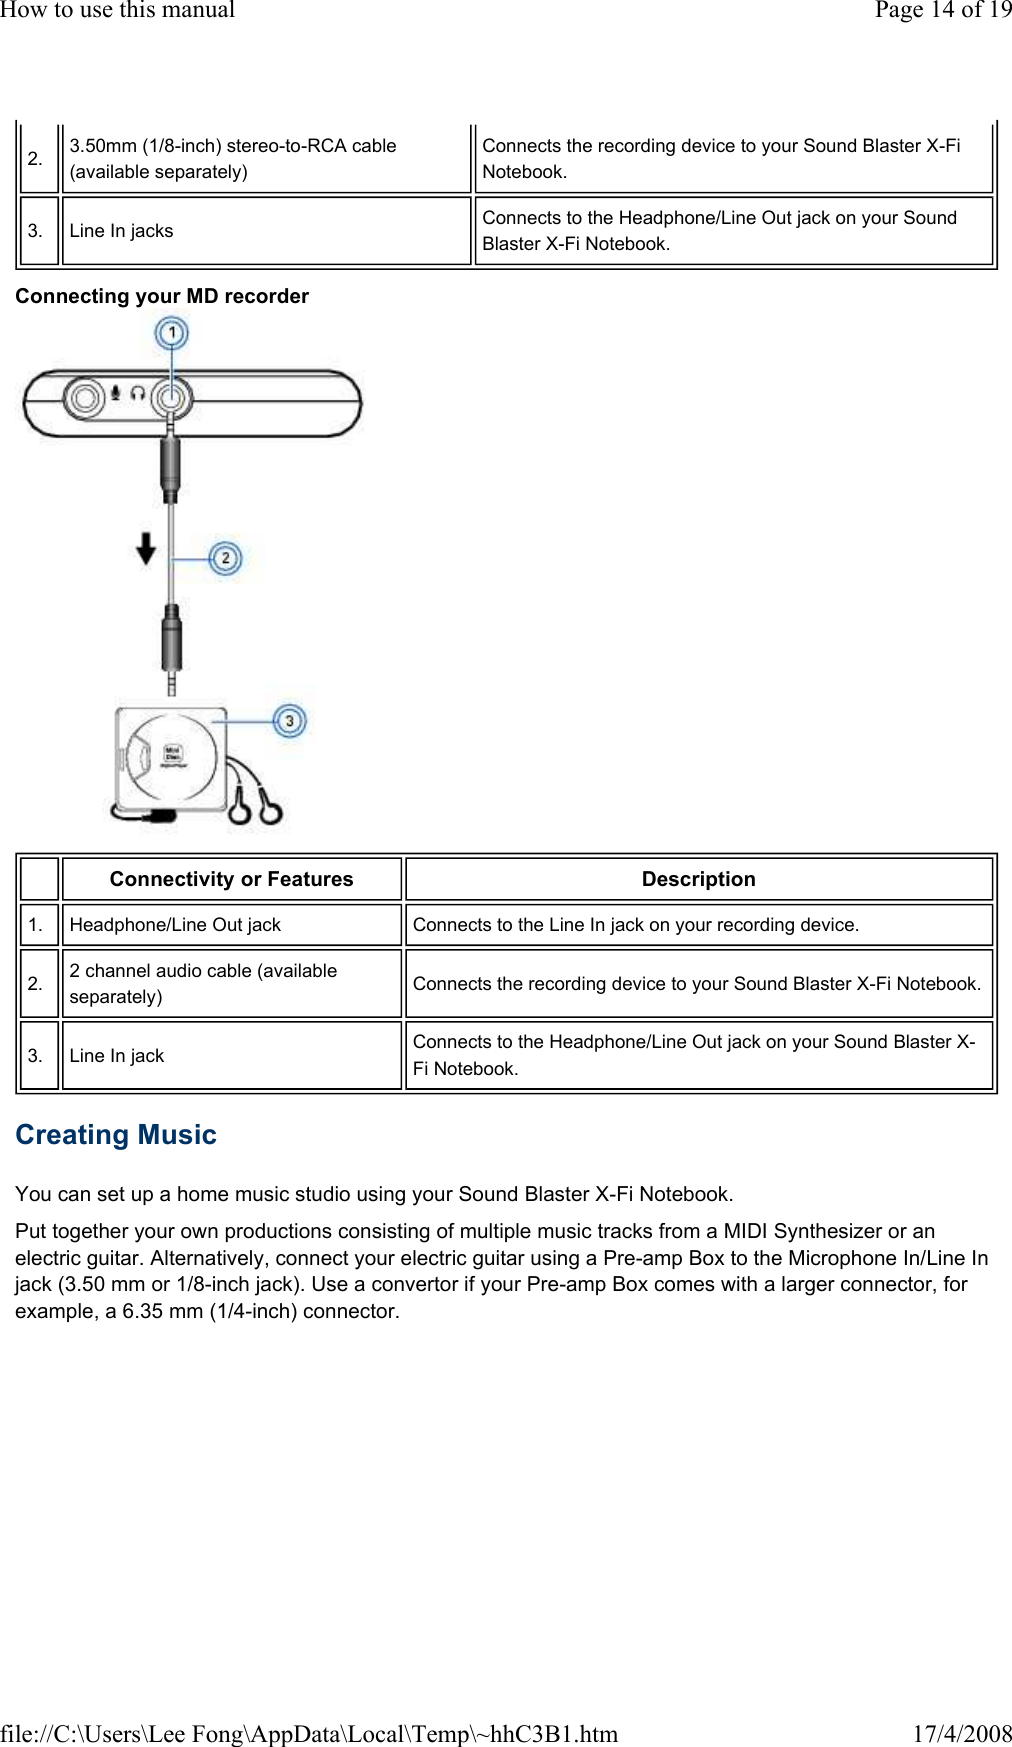 Connecting your MD recorder  Creating Music  You can set up a home music studio using your Sound Blaster X-Fi Notebook.  Put together your own productions consisting of multiple music tracks from a MIDI Synthesizer or an electric guitar. Alternatively, connect your electric guitar using a Pre-amp Box to the Microphone In/Line In jack (3.50 mm or 1/8-inch jack). Use a convertor if your Pre-amp Box comes with a larger connector, for example, a 6.35 mm (1/4-inch) connector. 2.   3.50mm (1/8-inch) stereo-to-RCA cable (available separately)  Connects the recording device to your Sound Blaster X-Fi Notebook.  3.   Line In jacks   Connects to the Headphone/Line Out jack on your Sound Blaster X-Fi Notebook.   Connectivity or Features   Description  1.   Headphone/Line Out jack   Connects to the Line In jack on your recording device.  2.   2 channel audio cable (available separately)   Connects the recording device to your Sound Blaster X-Fi Notebook.  3.   Line In jack   Connects to the Headphone/Line Out jack on your Sound Blaster X-Fi Notebook.  Page 14 of 19How to use this manual17/4/2008file://C:\Users\Lee Fong\AppData\Local\Temp\~hhC3B1.htm